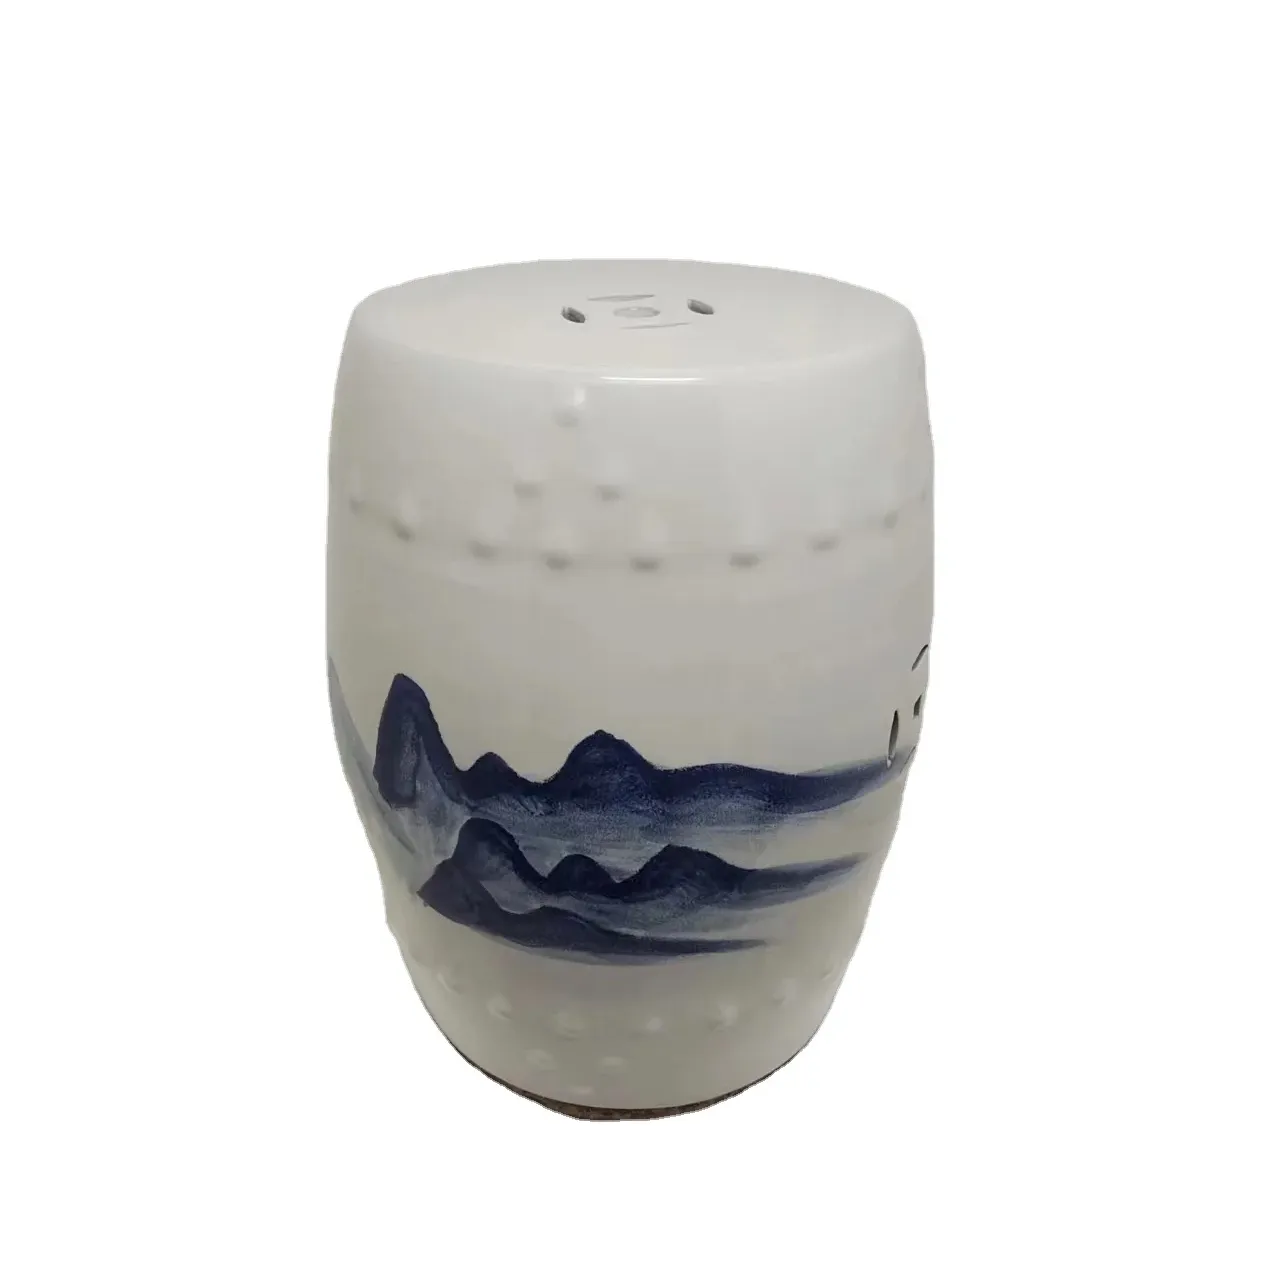 Chinese hand-painted blue and white landscape ceramic drum stool